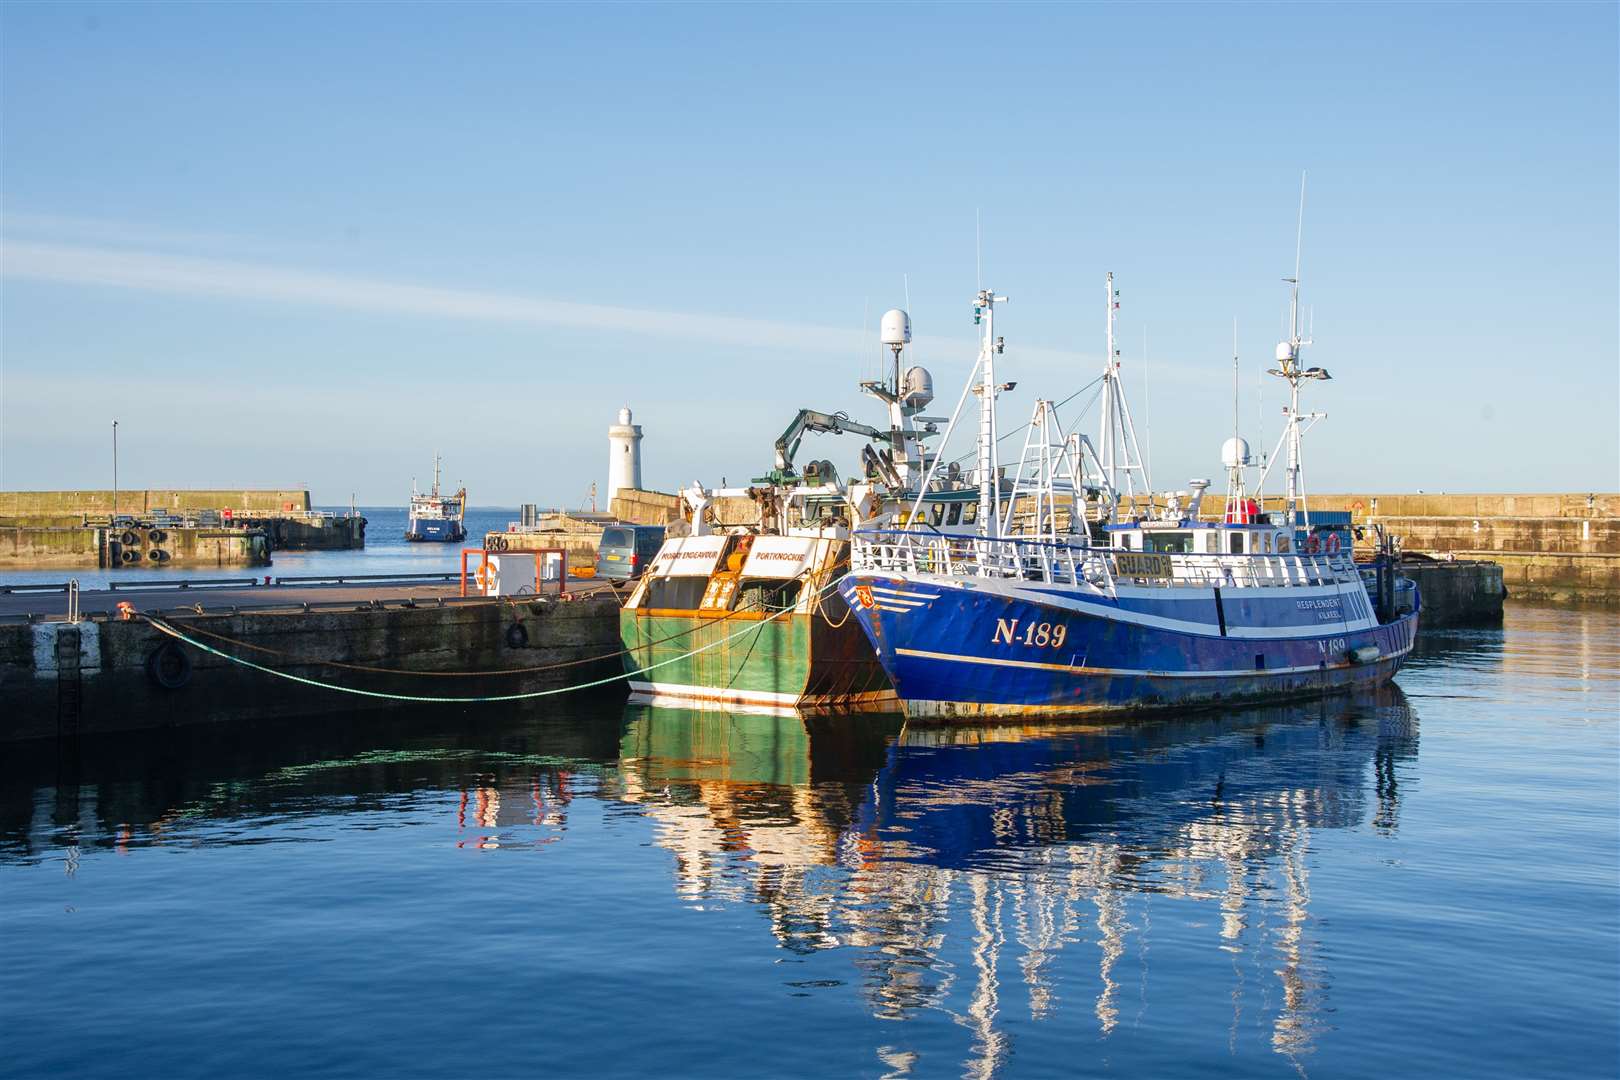 It was a much busier week on the fish landings front at Buckie Harbour.